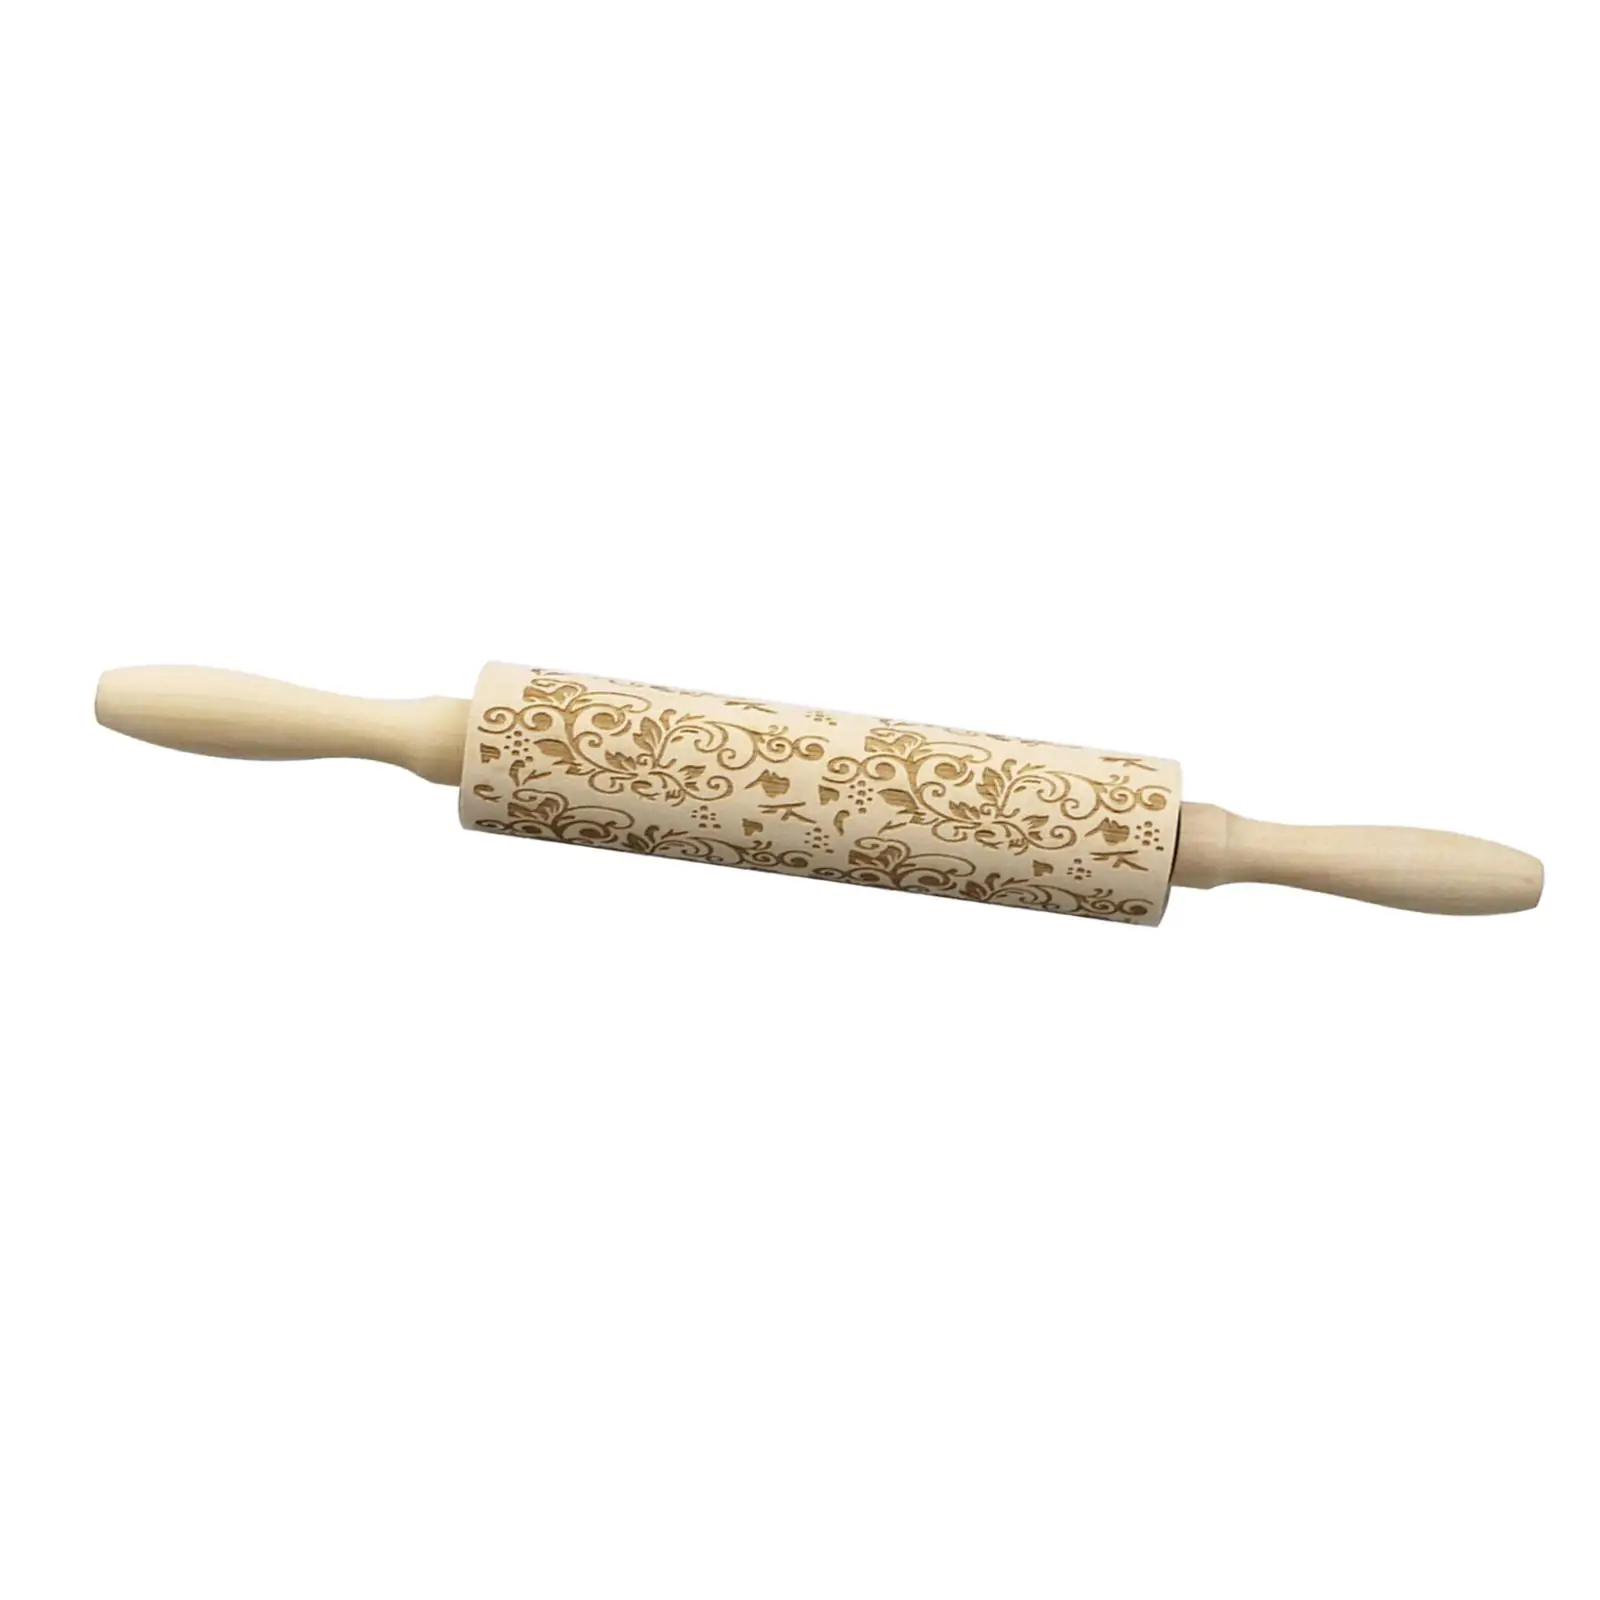 Wooden Rolling Pin Engraved Embossing Rolling Pin for Baking Pastry Pancakes